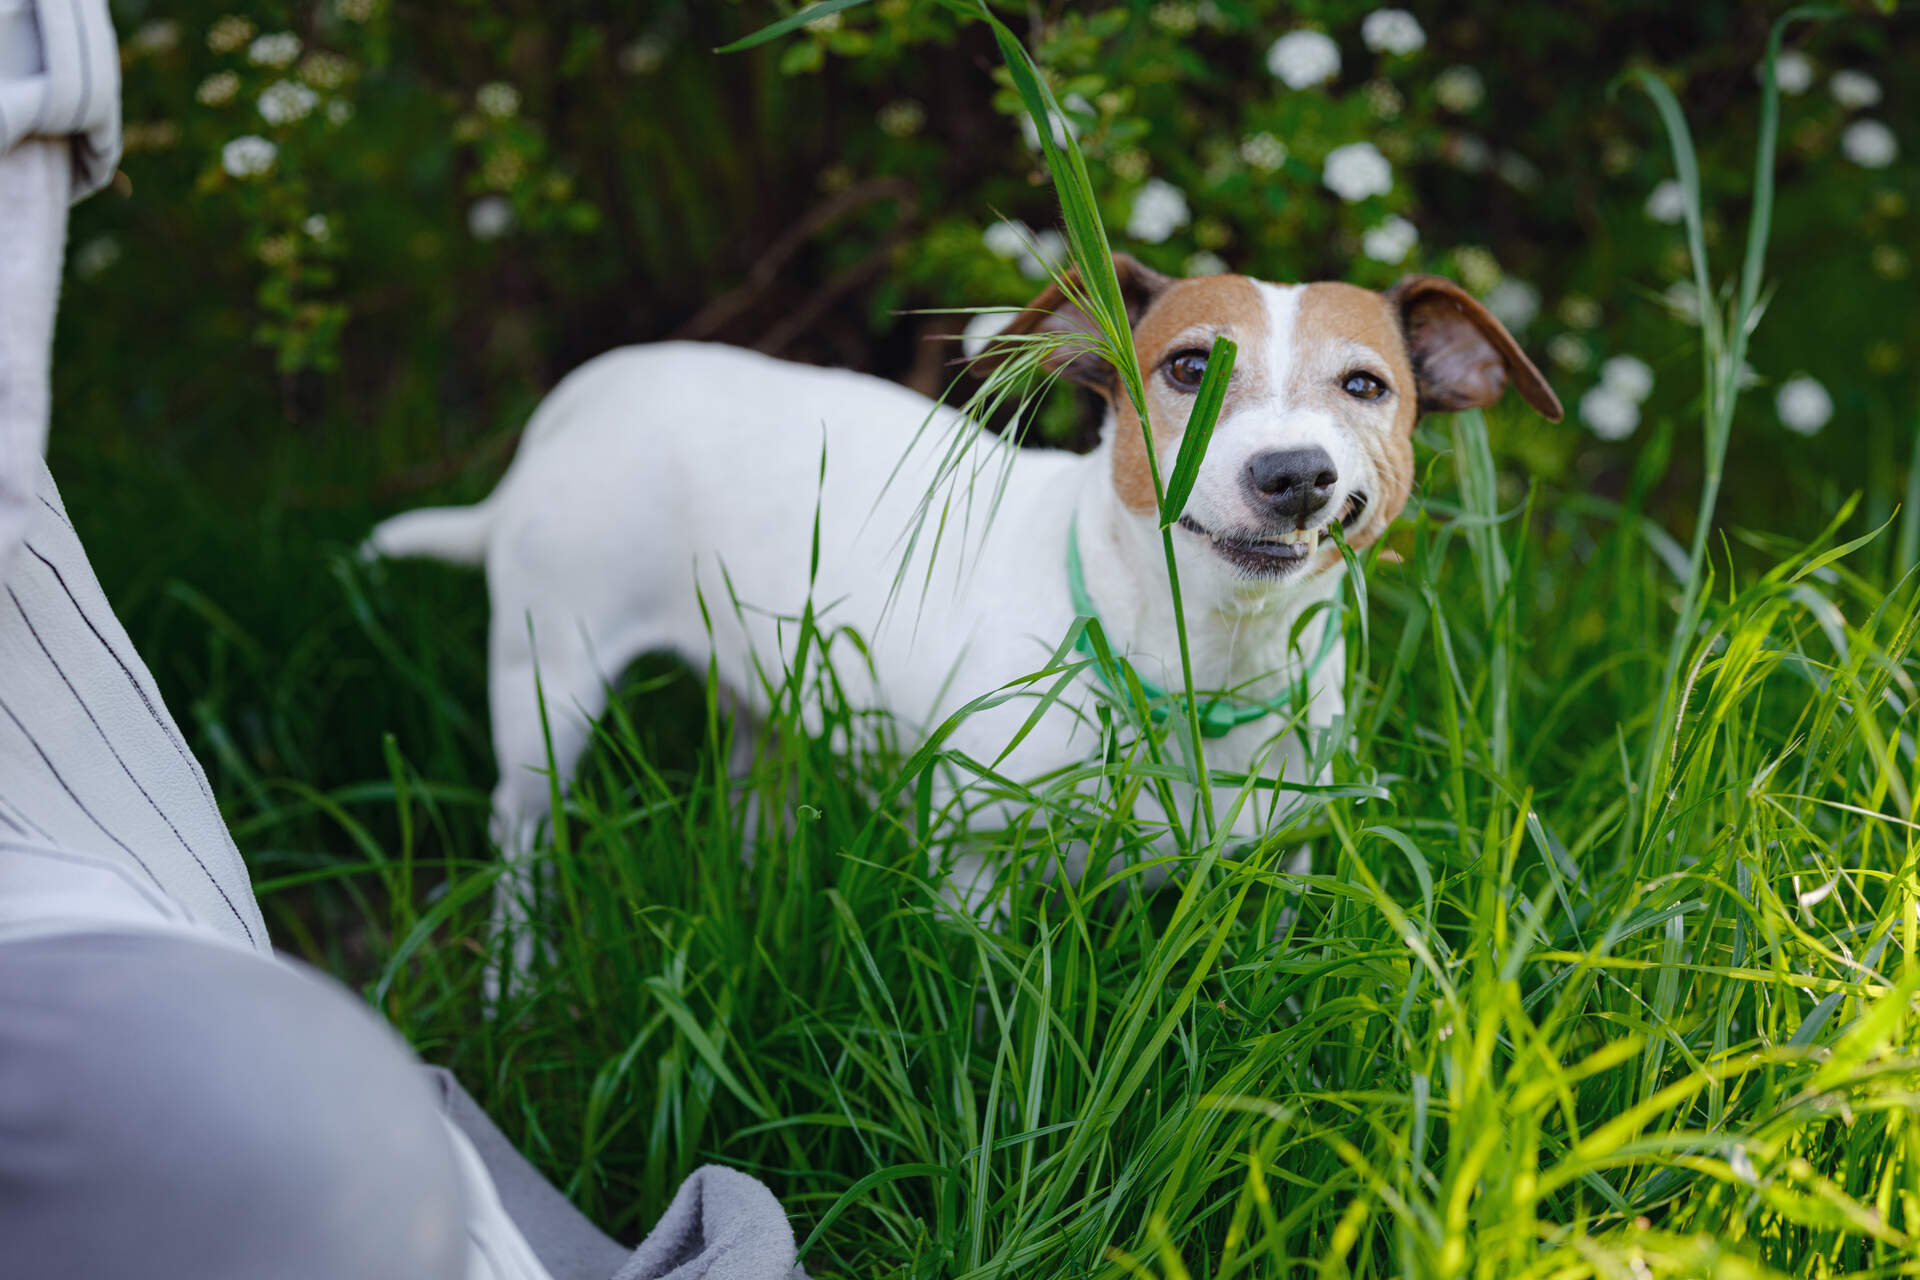  A Jack Russell Terrier nibbling on a blade of grass in a garden